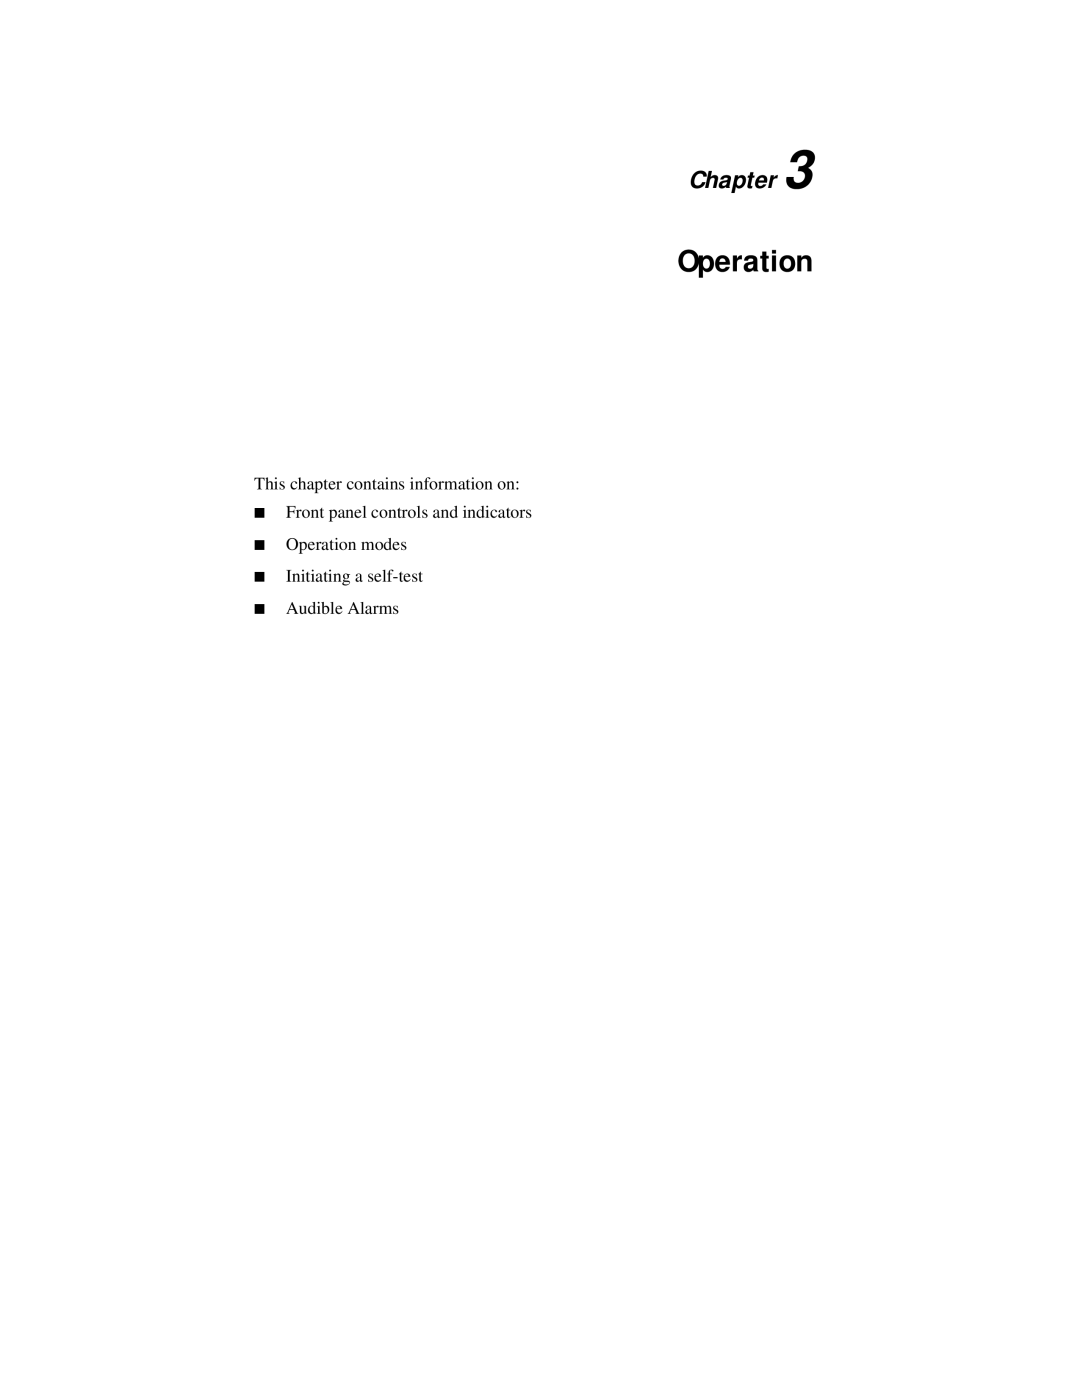 Compaq R6000 Series manual Operation, Chapter, This chapter contains information on, Initiating a self-test Audible Alarms 